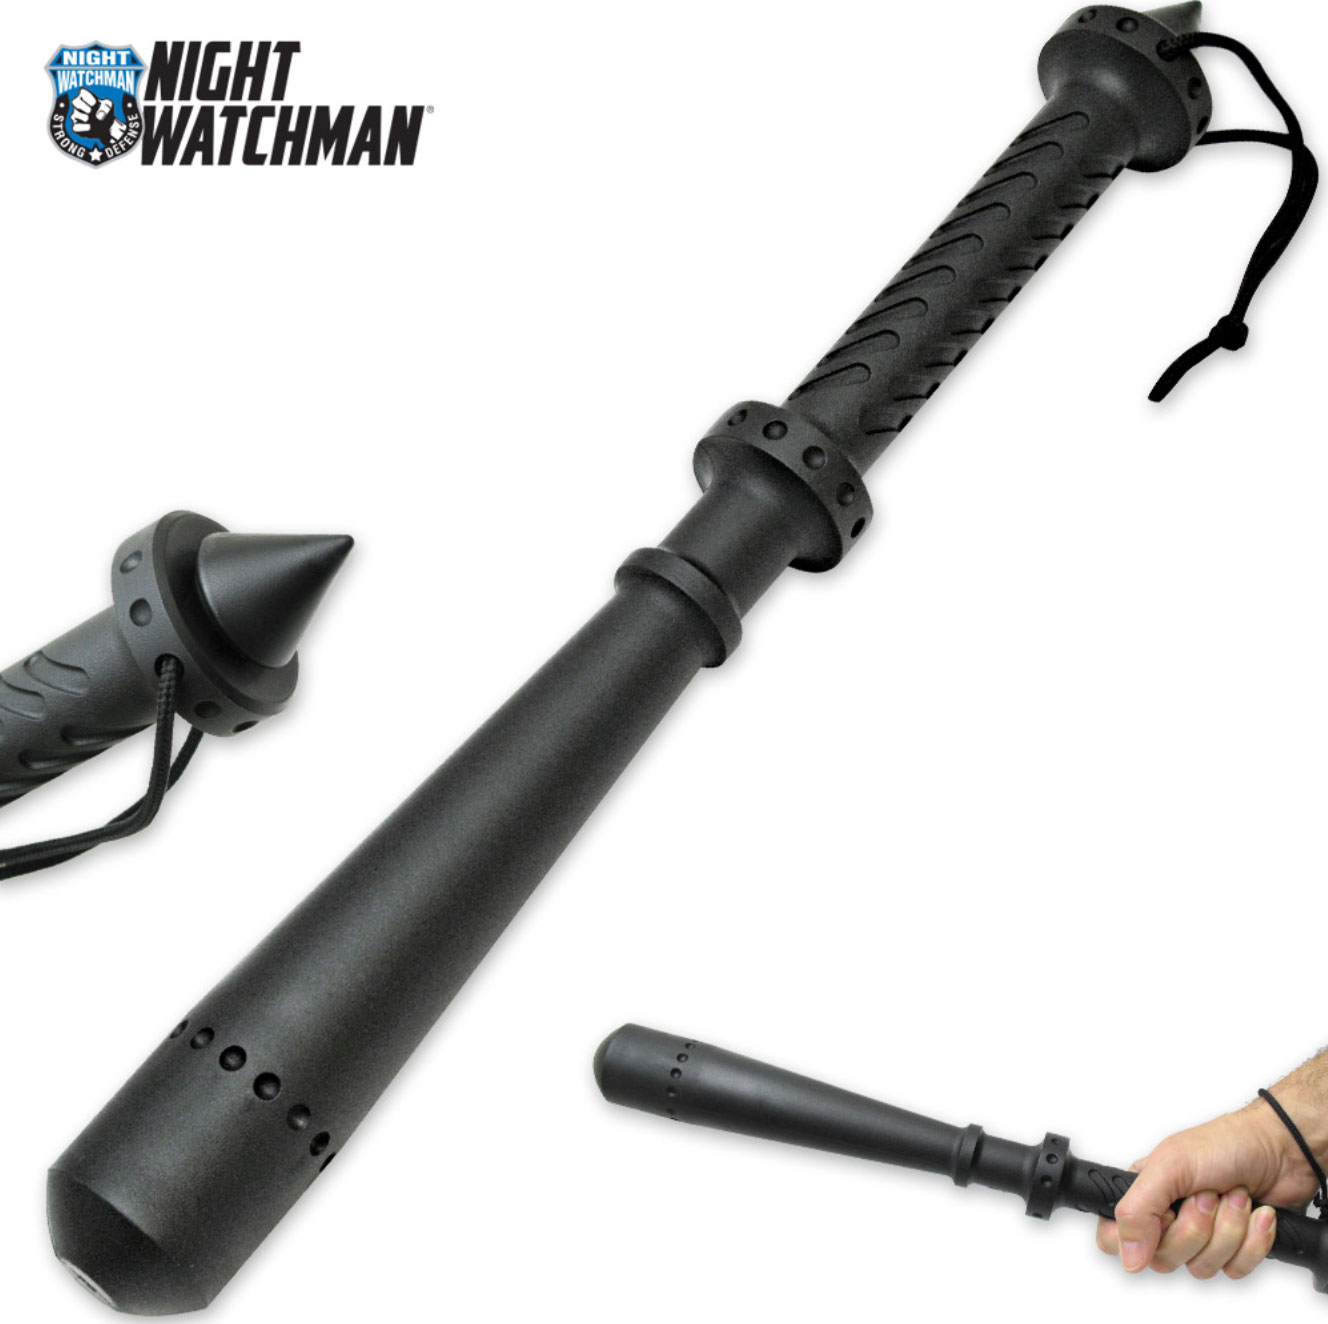 Designed specifically for law enforcement agencies, the Night Watchman Thumper is a deterrent you can count on when you’re facing the toughest situations. It is a solid piece of injection molded polypropylene with a textured, secure-fit handle to ensure you have a rock-solid grip.